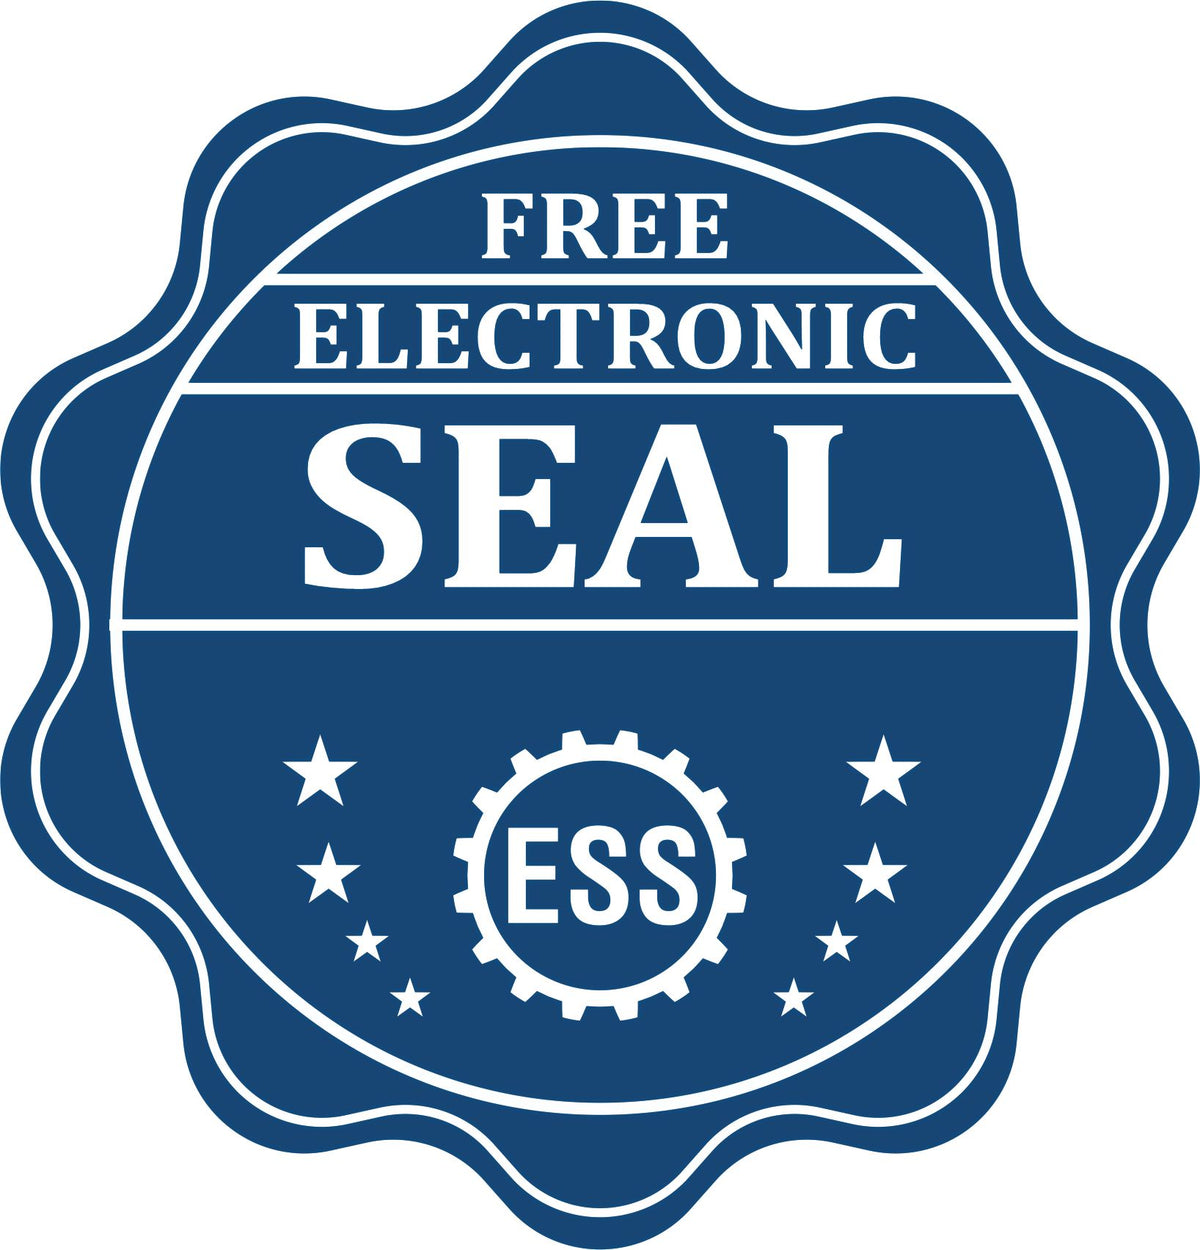 A badge showing a free electronic seal for the State of West Virginia Extended Long Reach Engineer Seal with stars and the ESS gear on the emblem.